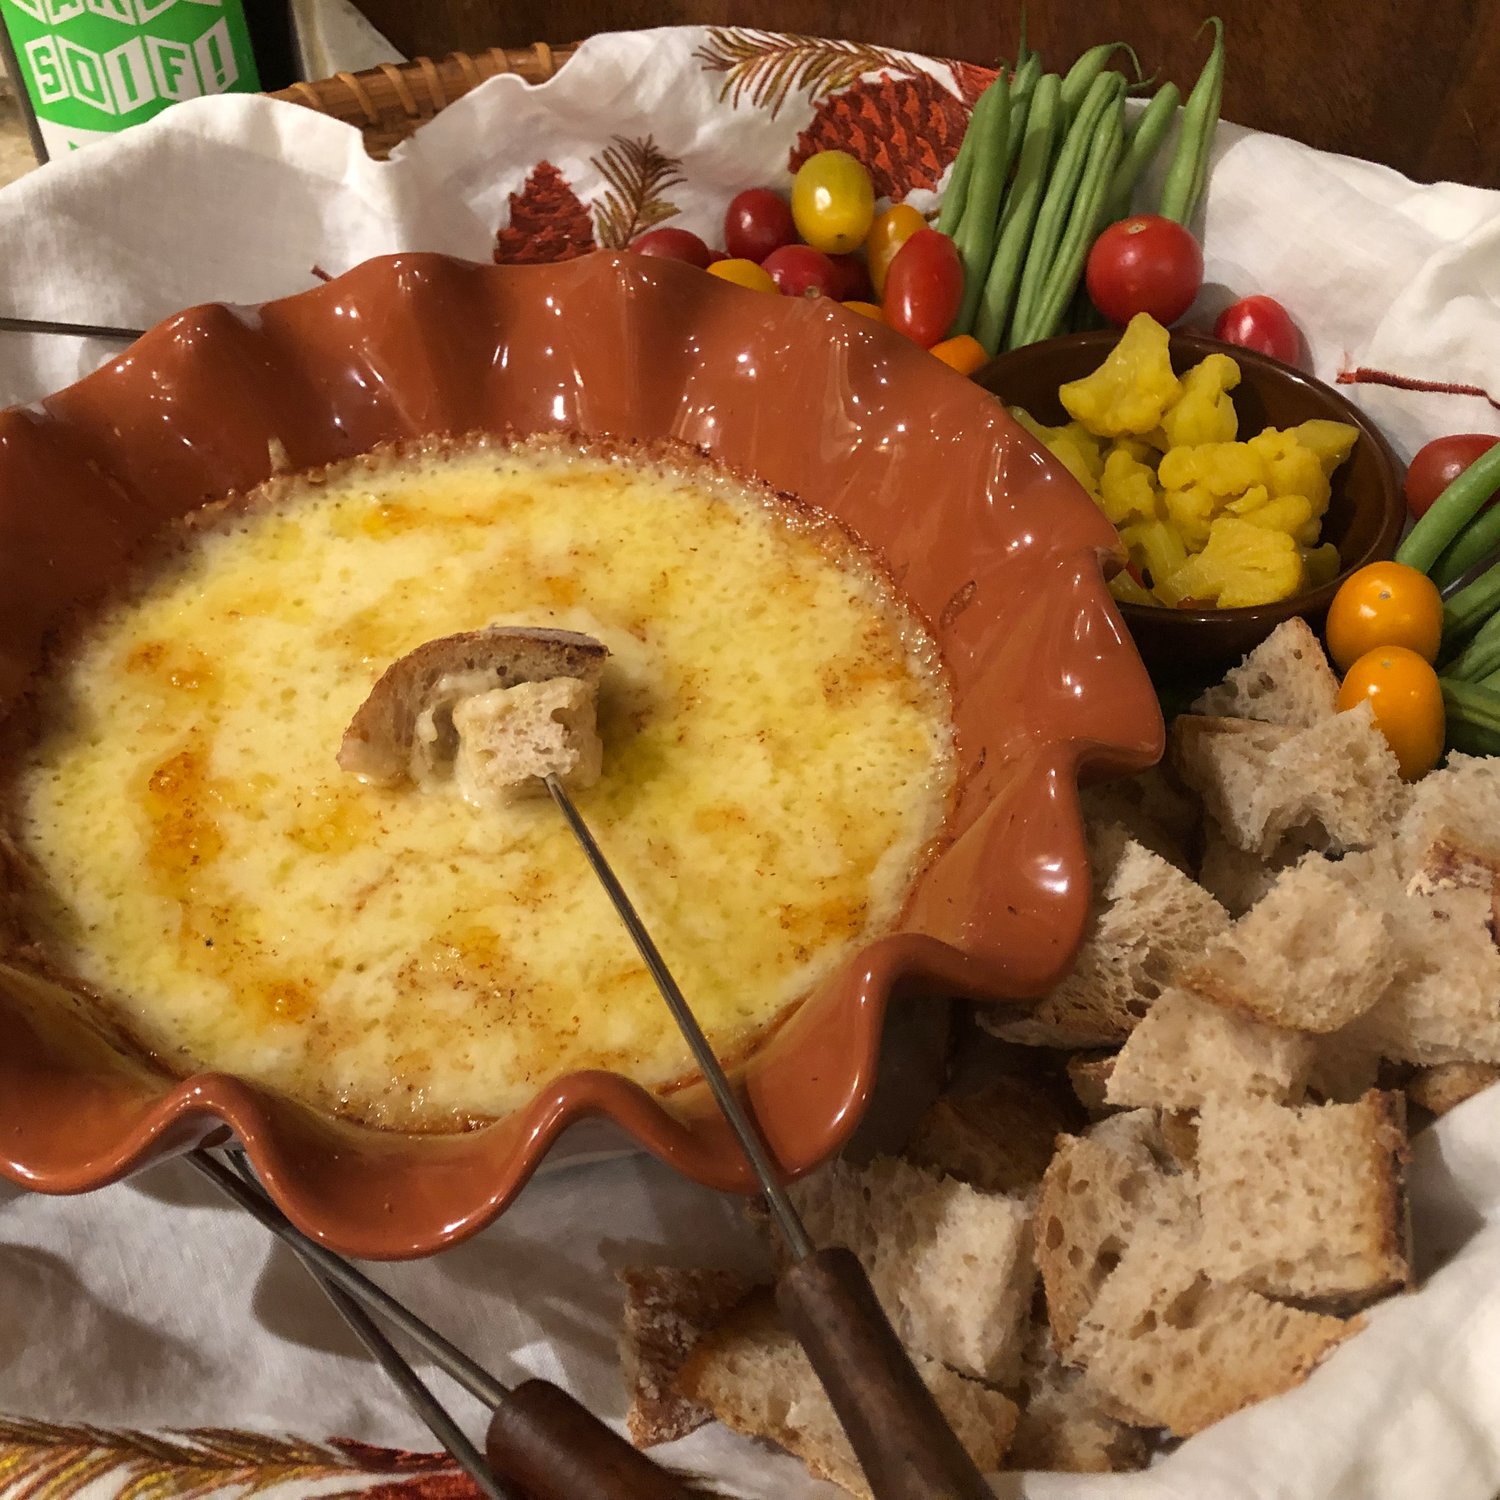 “The Snowy Cabin Cookbook’s” Foolproof Fondue is baked in a shallow gratin dish instead of heated in a fondue pot, and served with bread cubes and vegetables.